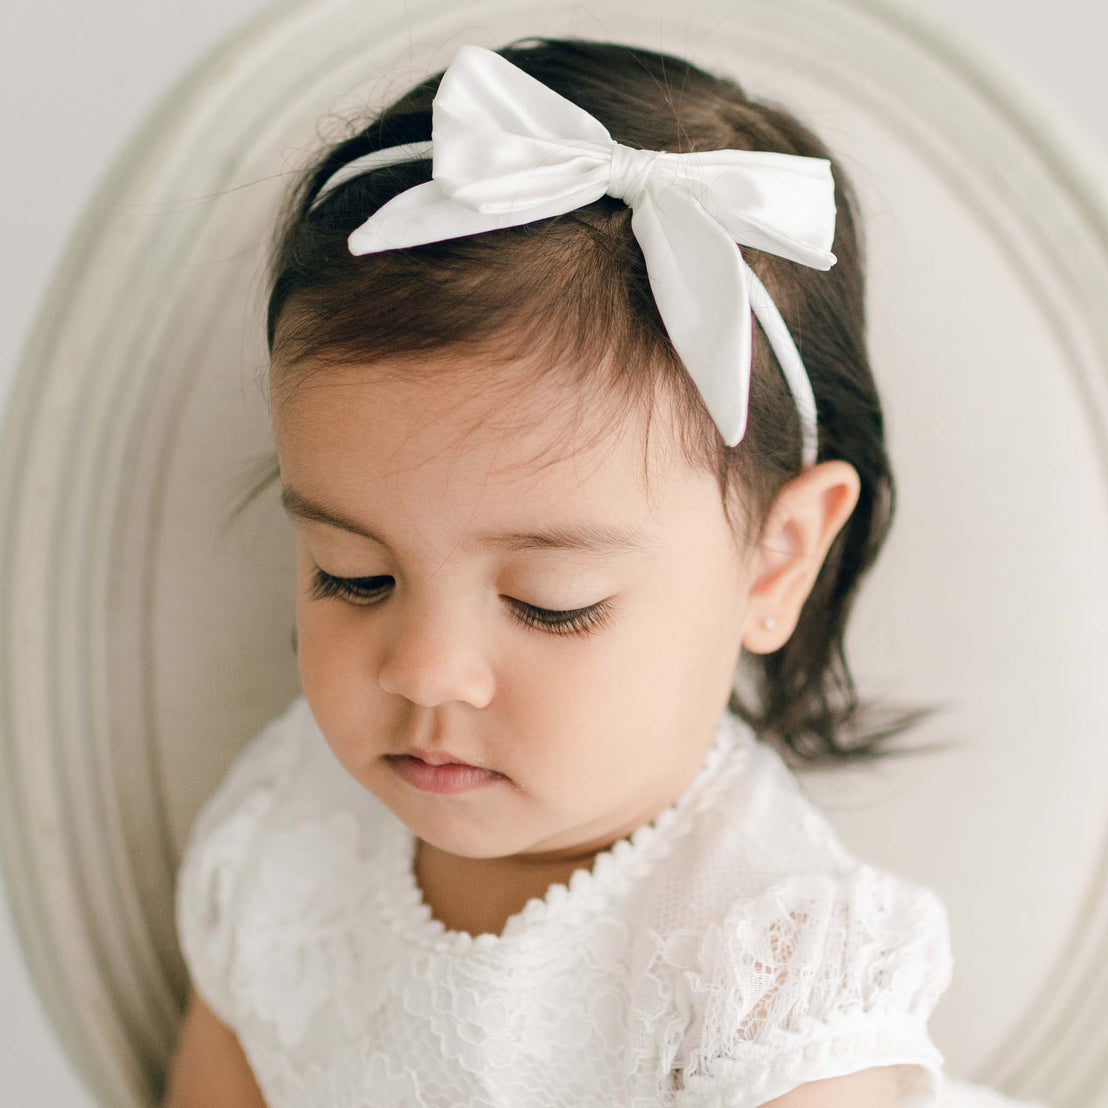 Baby girl wearing the Victoria Christening Headband in Ivory.